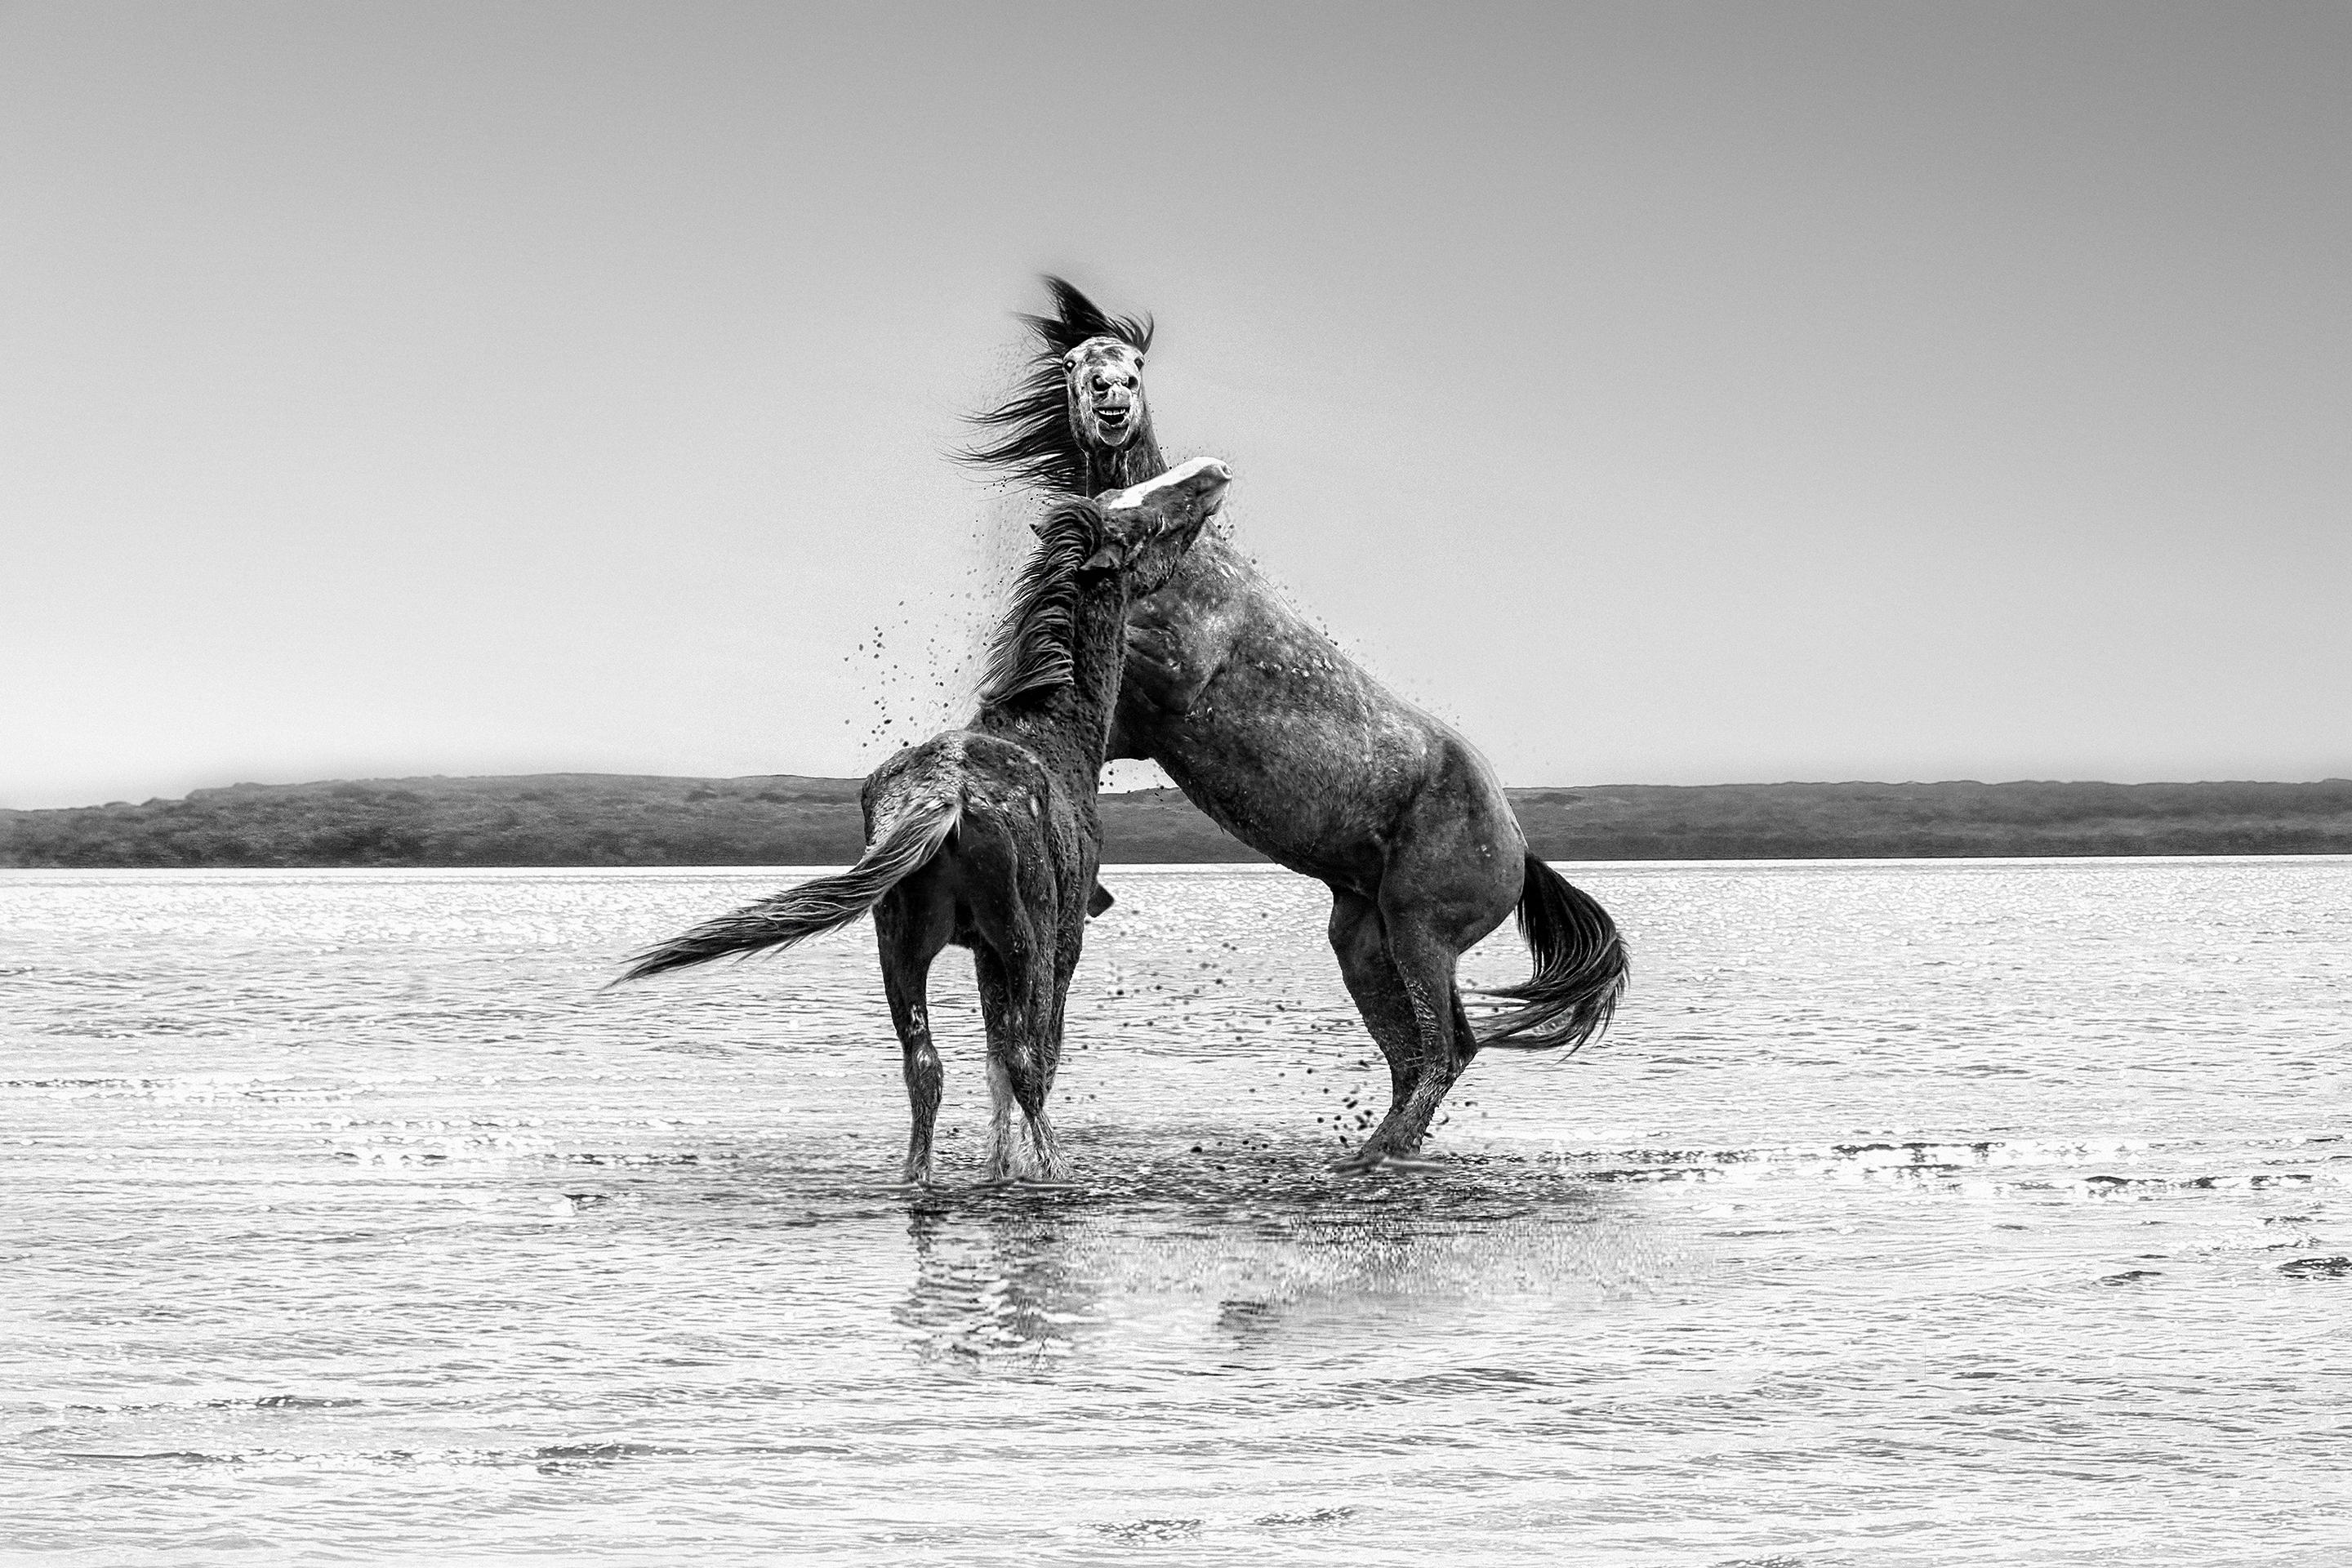 Shane Russeck Landscape Photograph - The Pugilist - 40x60 Contemporary Black and White Photography of Wild Horses